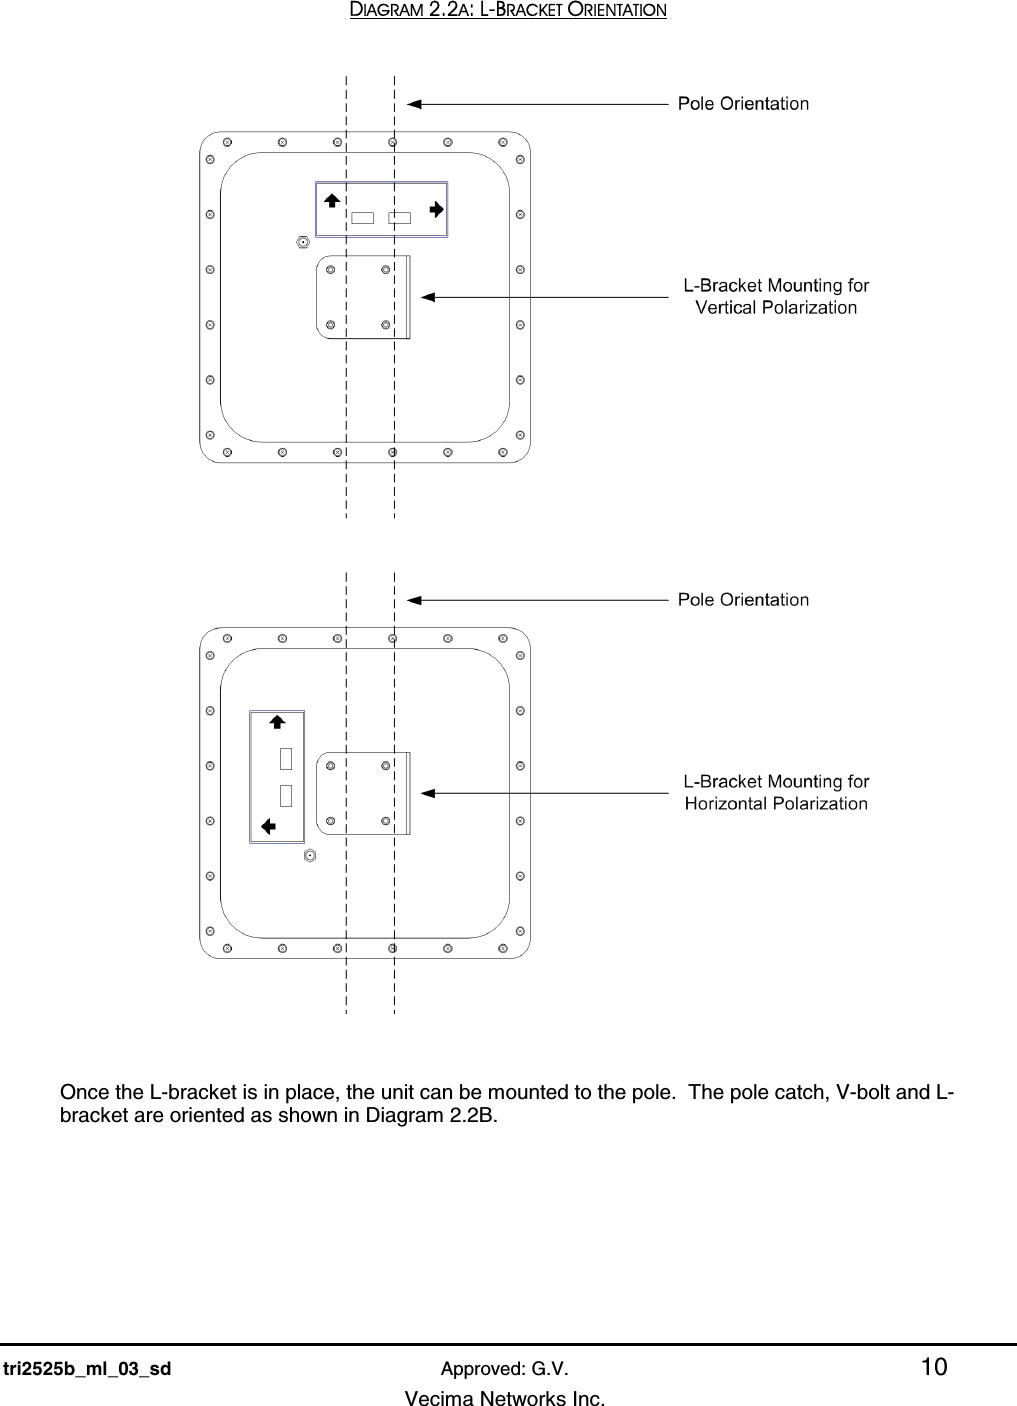    tri2525b_ml_03_sd Approved: G.V. 10   Vecima Networks Inc.  DIAGRAM 2.2A: L-BRACKET ORIENTATION     Once the L-bracket is in place, the unit can be mounted to the pole.  The pole catch, V-bolt and L-bracket are oriented as shown in Diagram 2.2B.   